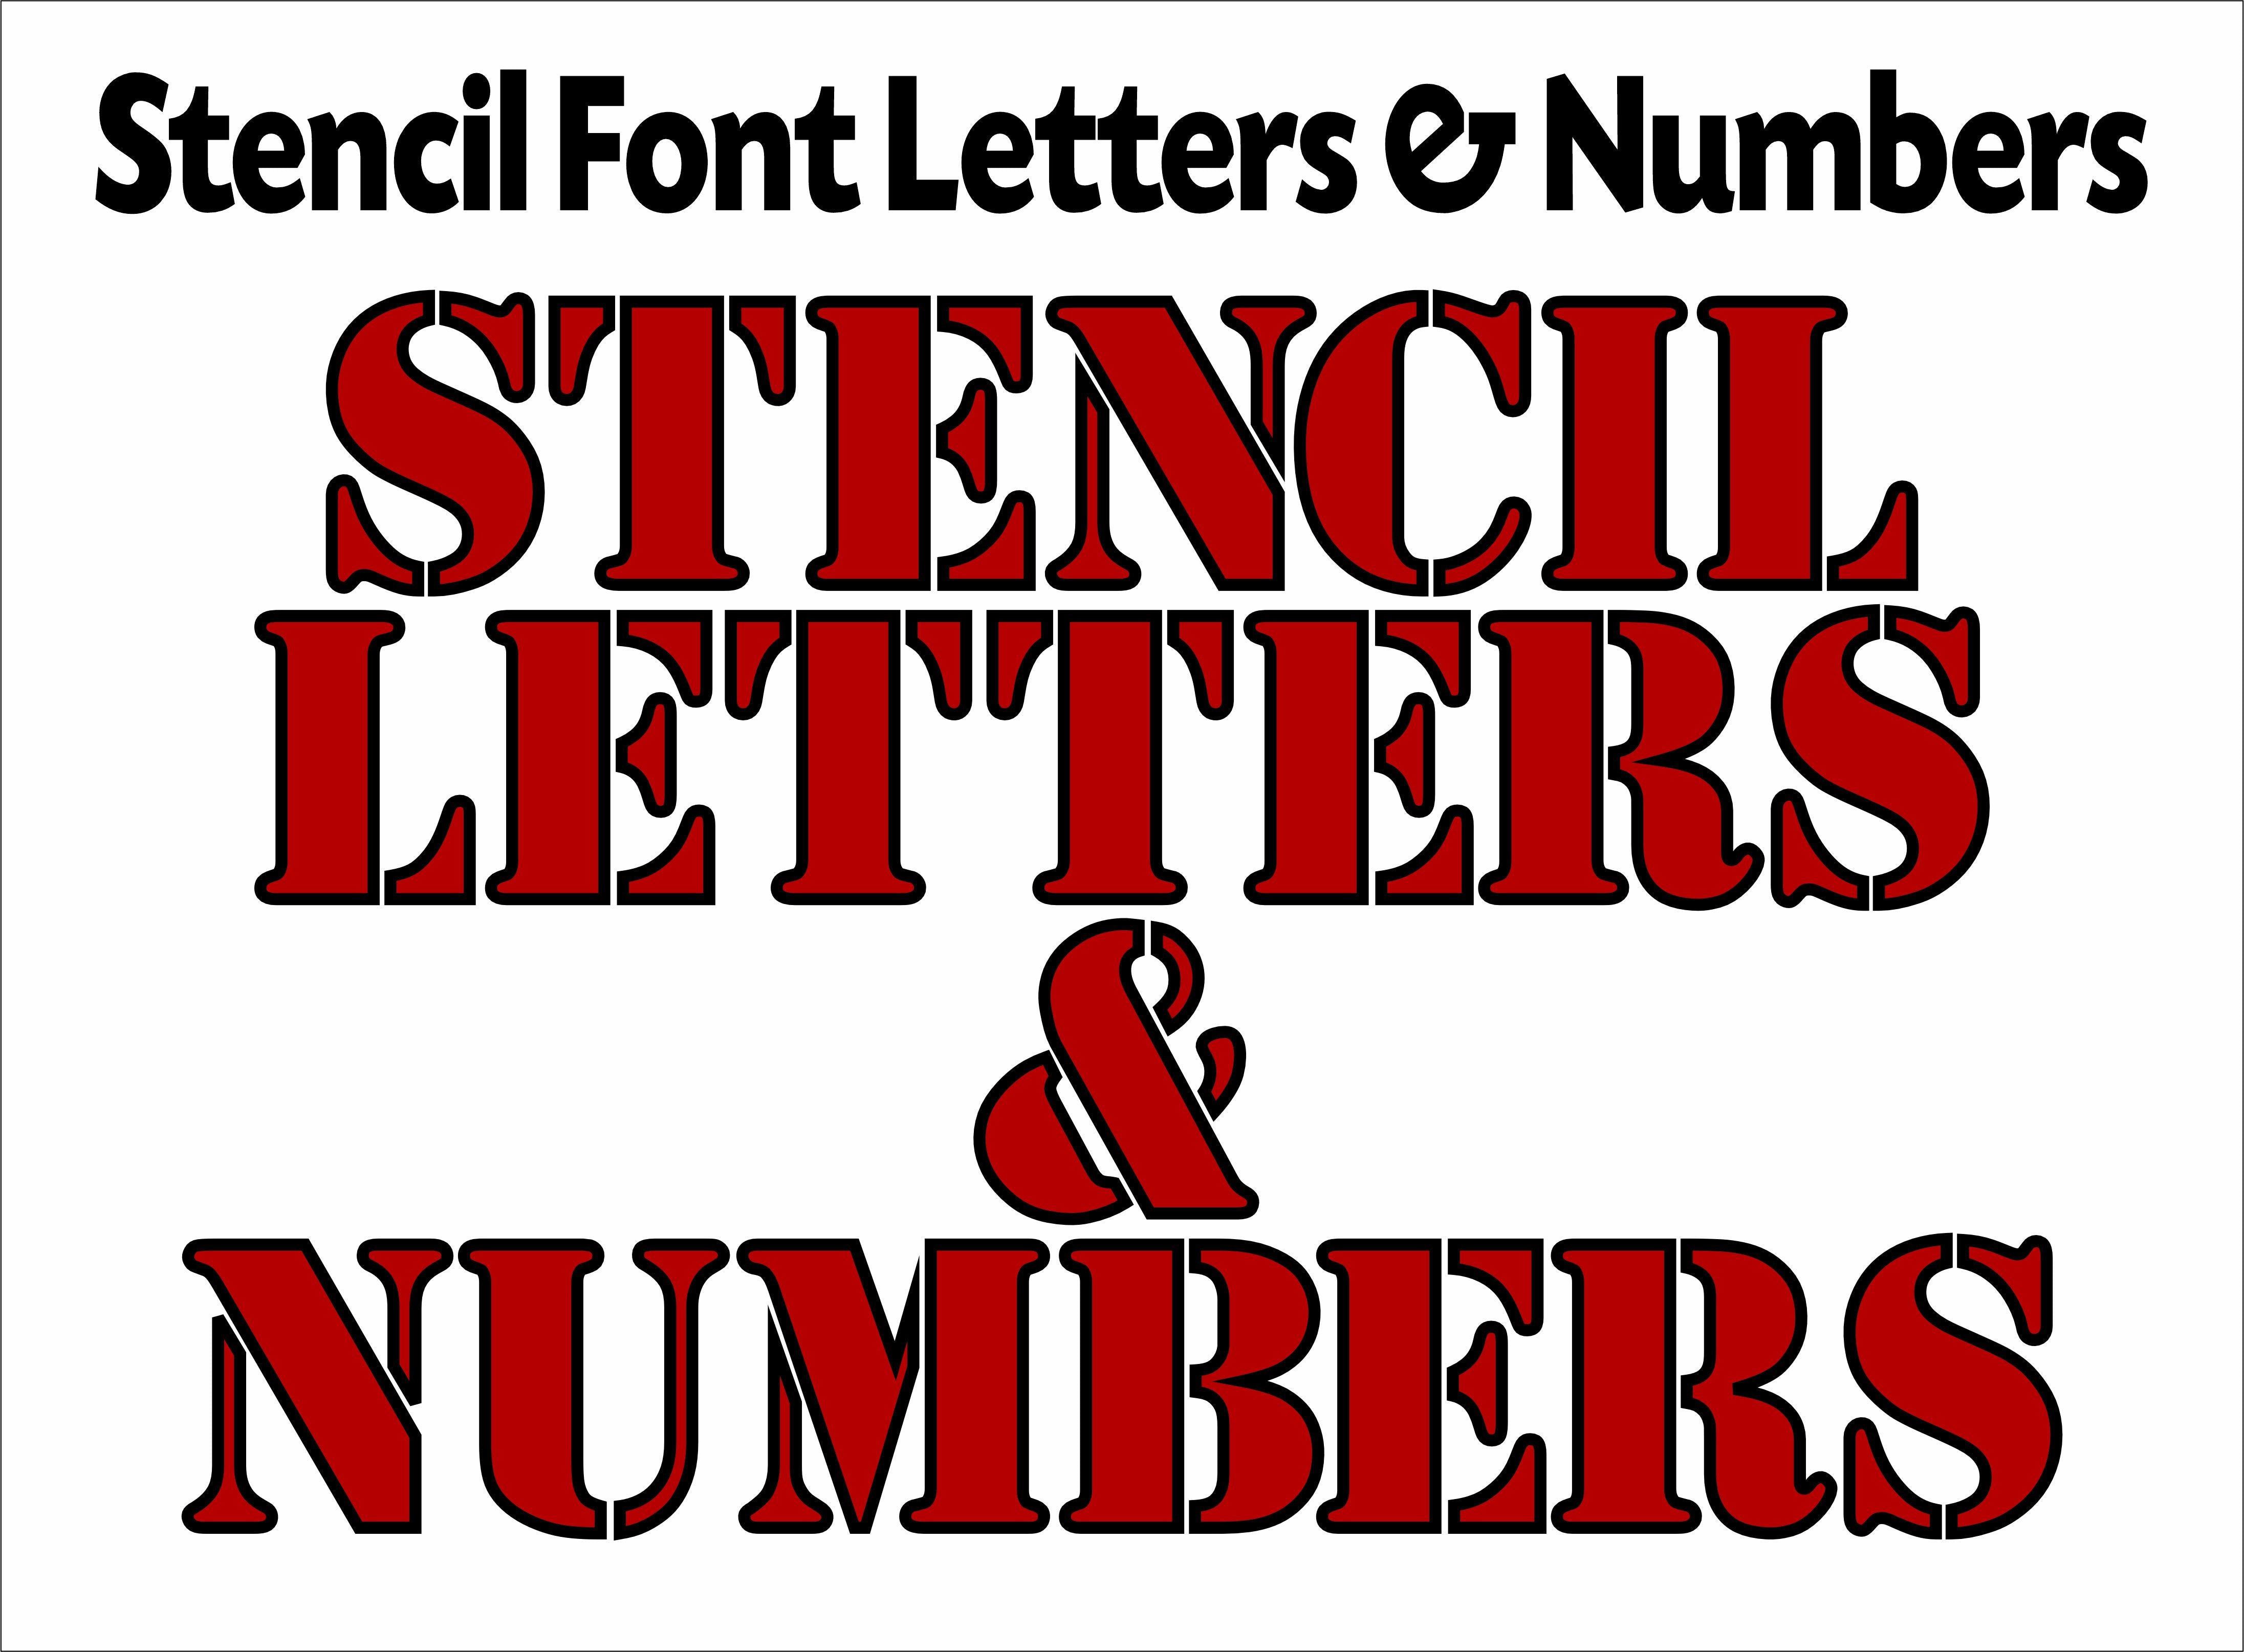 Stencil Font STANDARD SHADOW letters & numbers – Powercall Sirens LLC